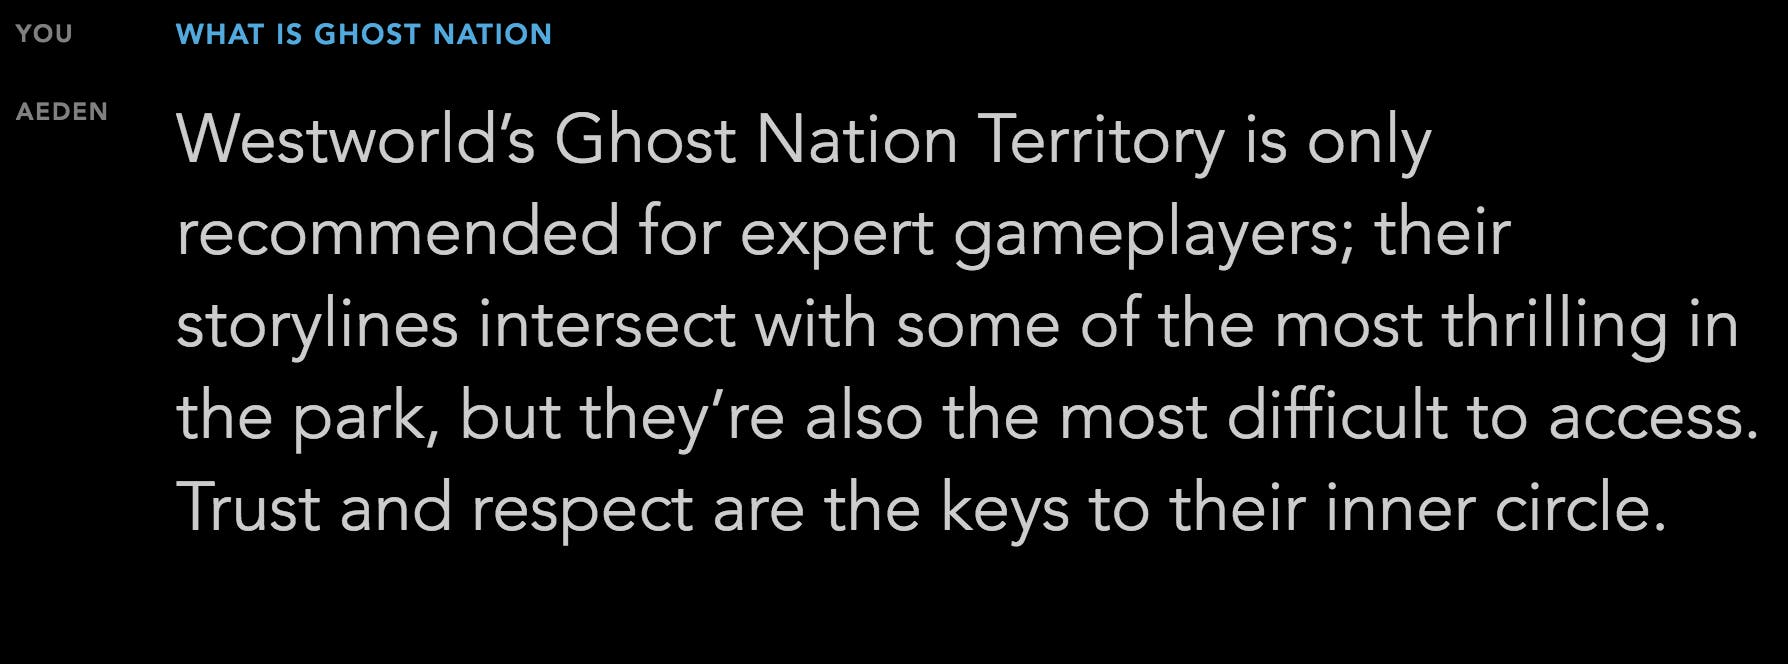 ghost nation